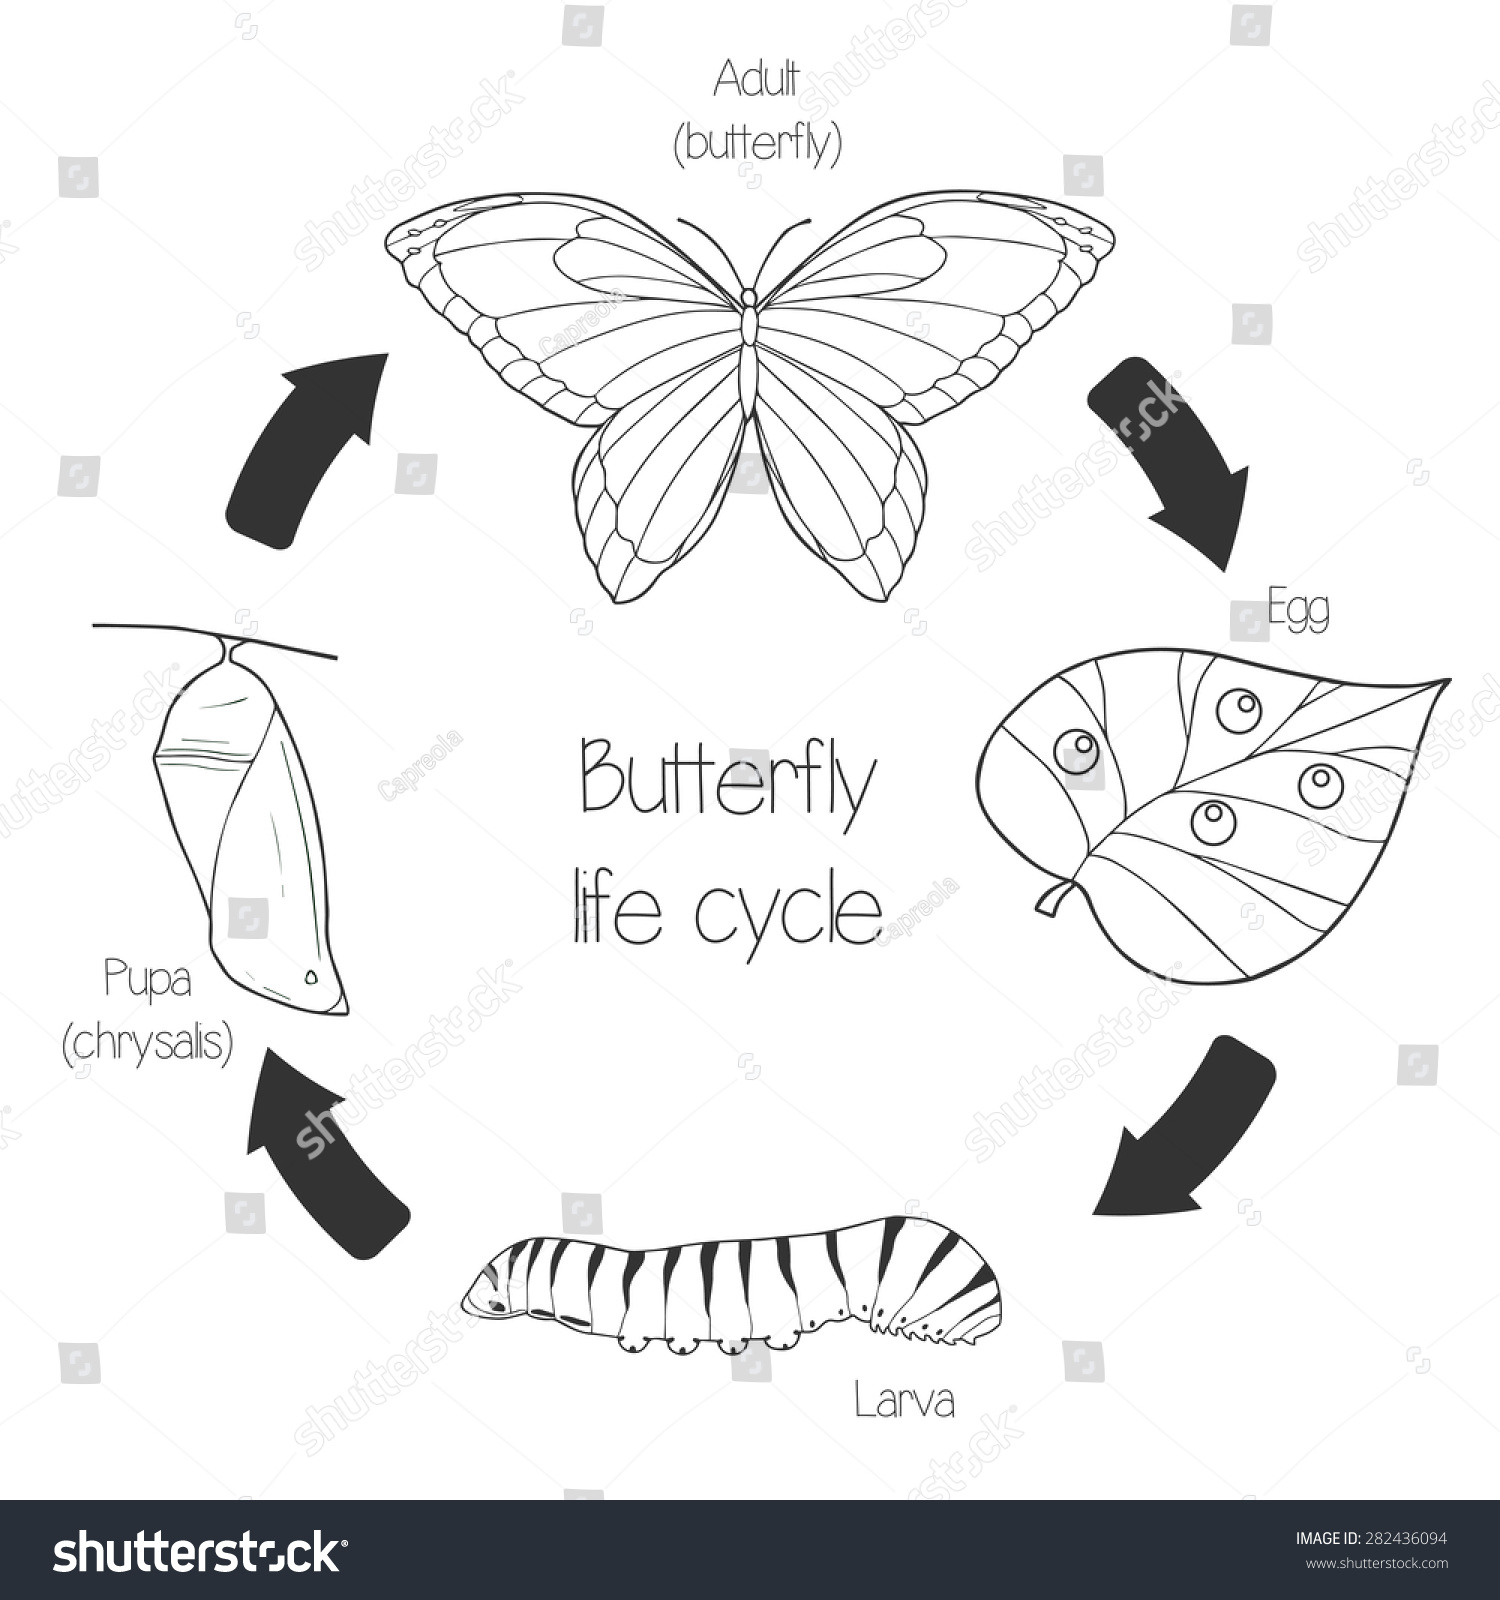 free clip art butterfly life cycle - photo #50